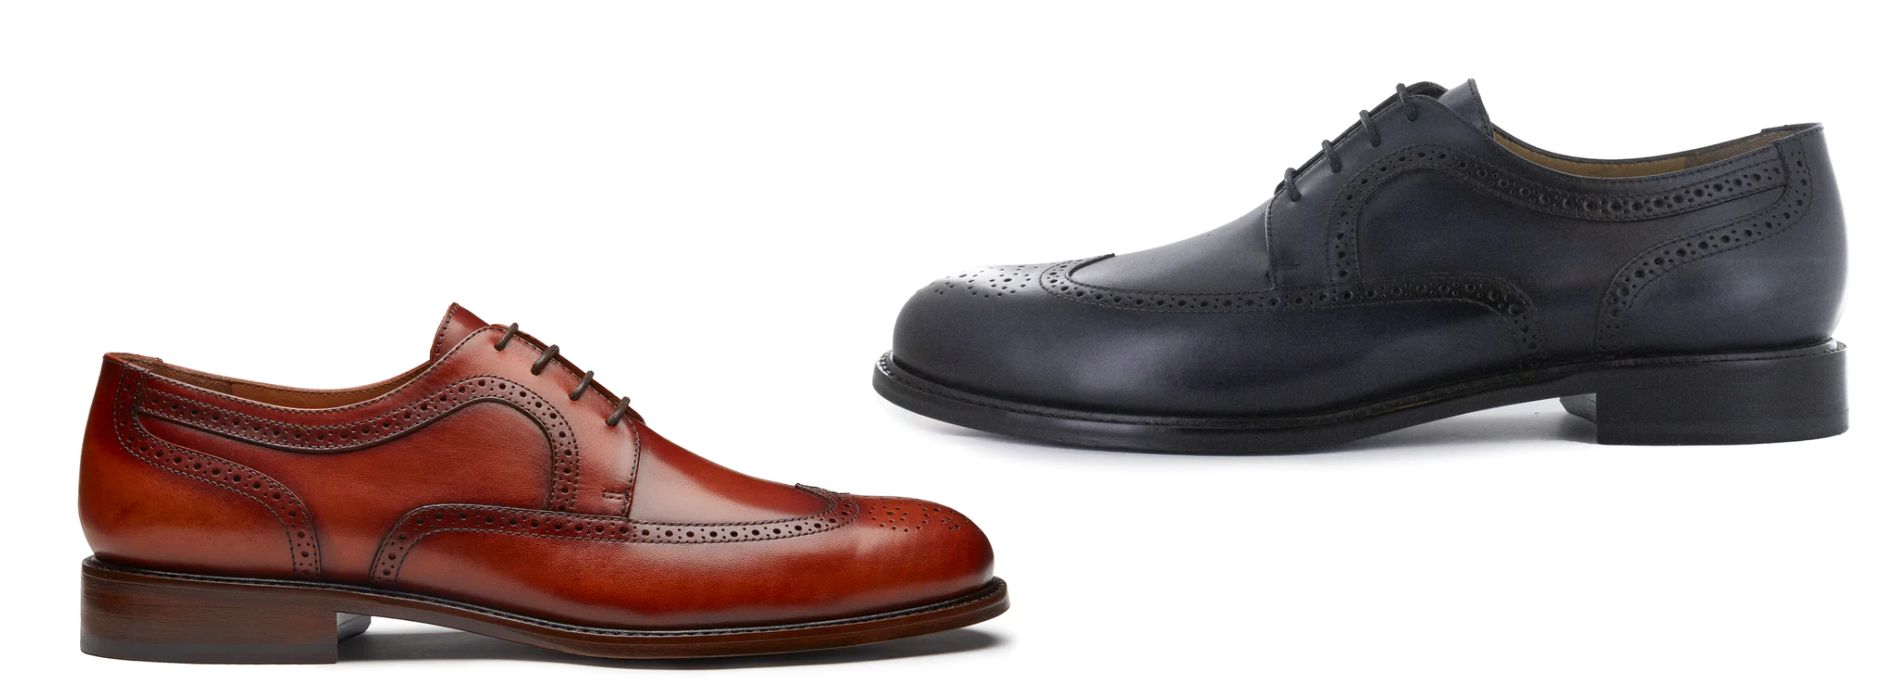 wingtip-shoes-a-classic-look-in-menswear